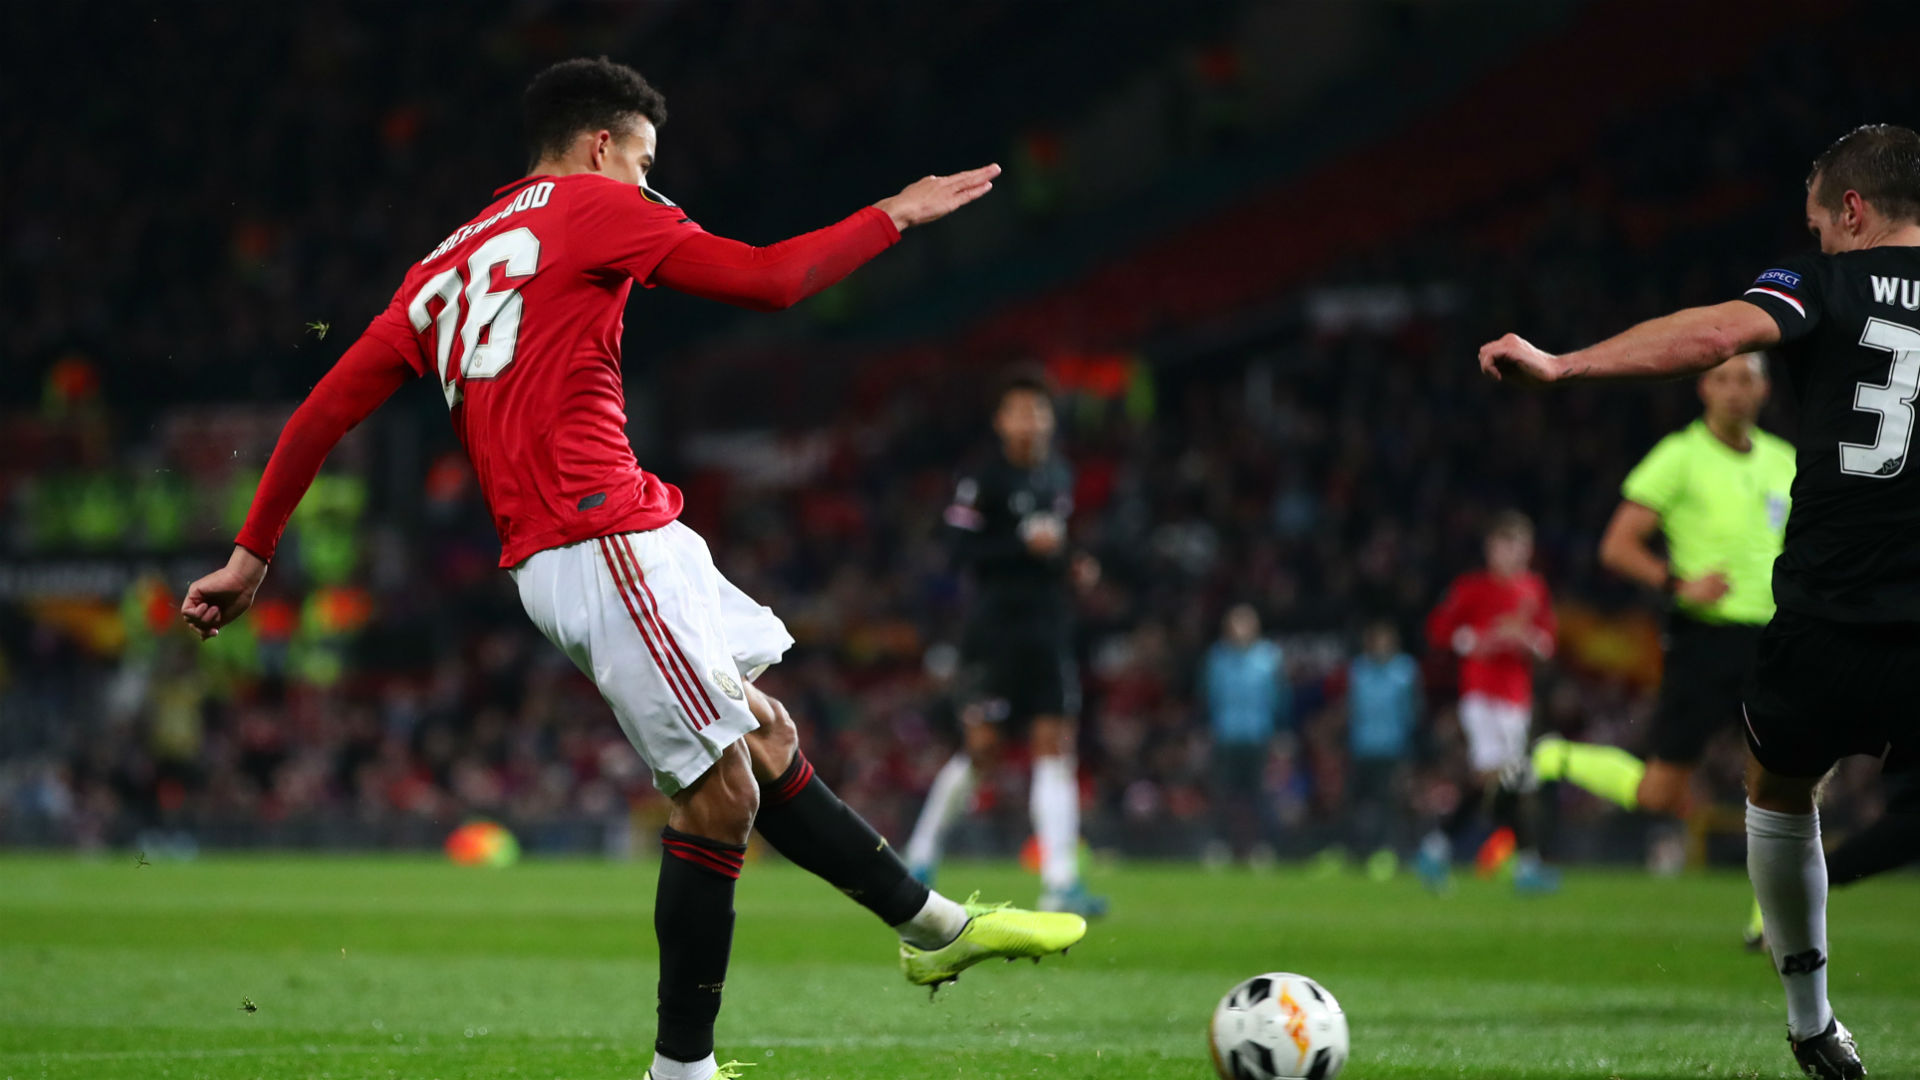 Manchester United 4-0 AZ: Greenwood dazzles as hosts seal top spot